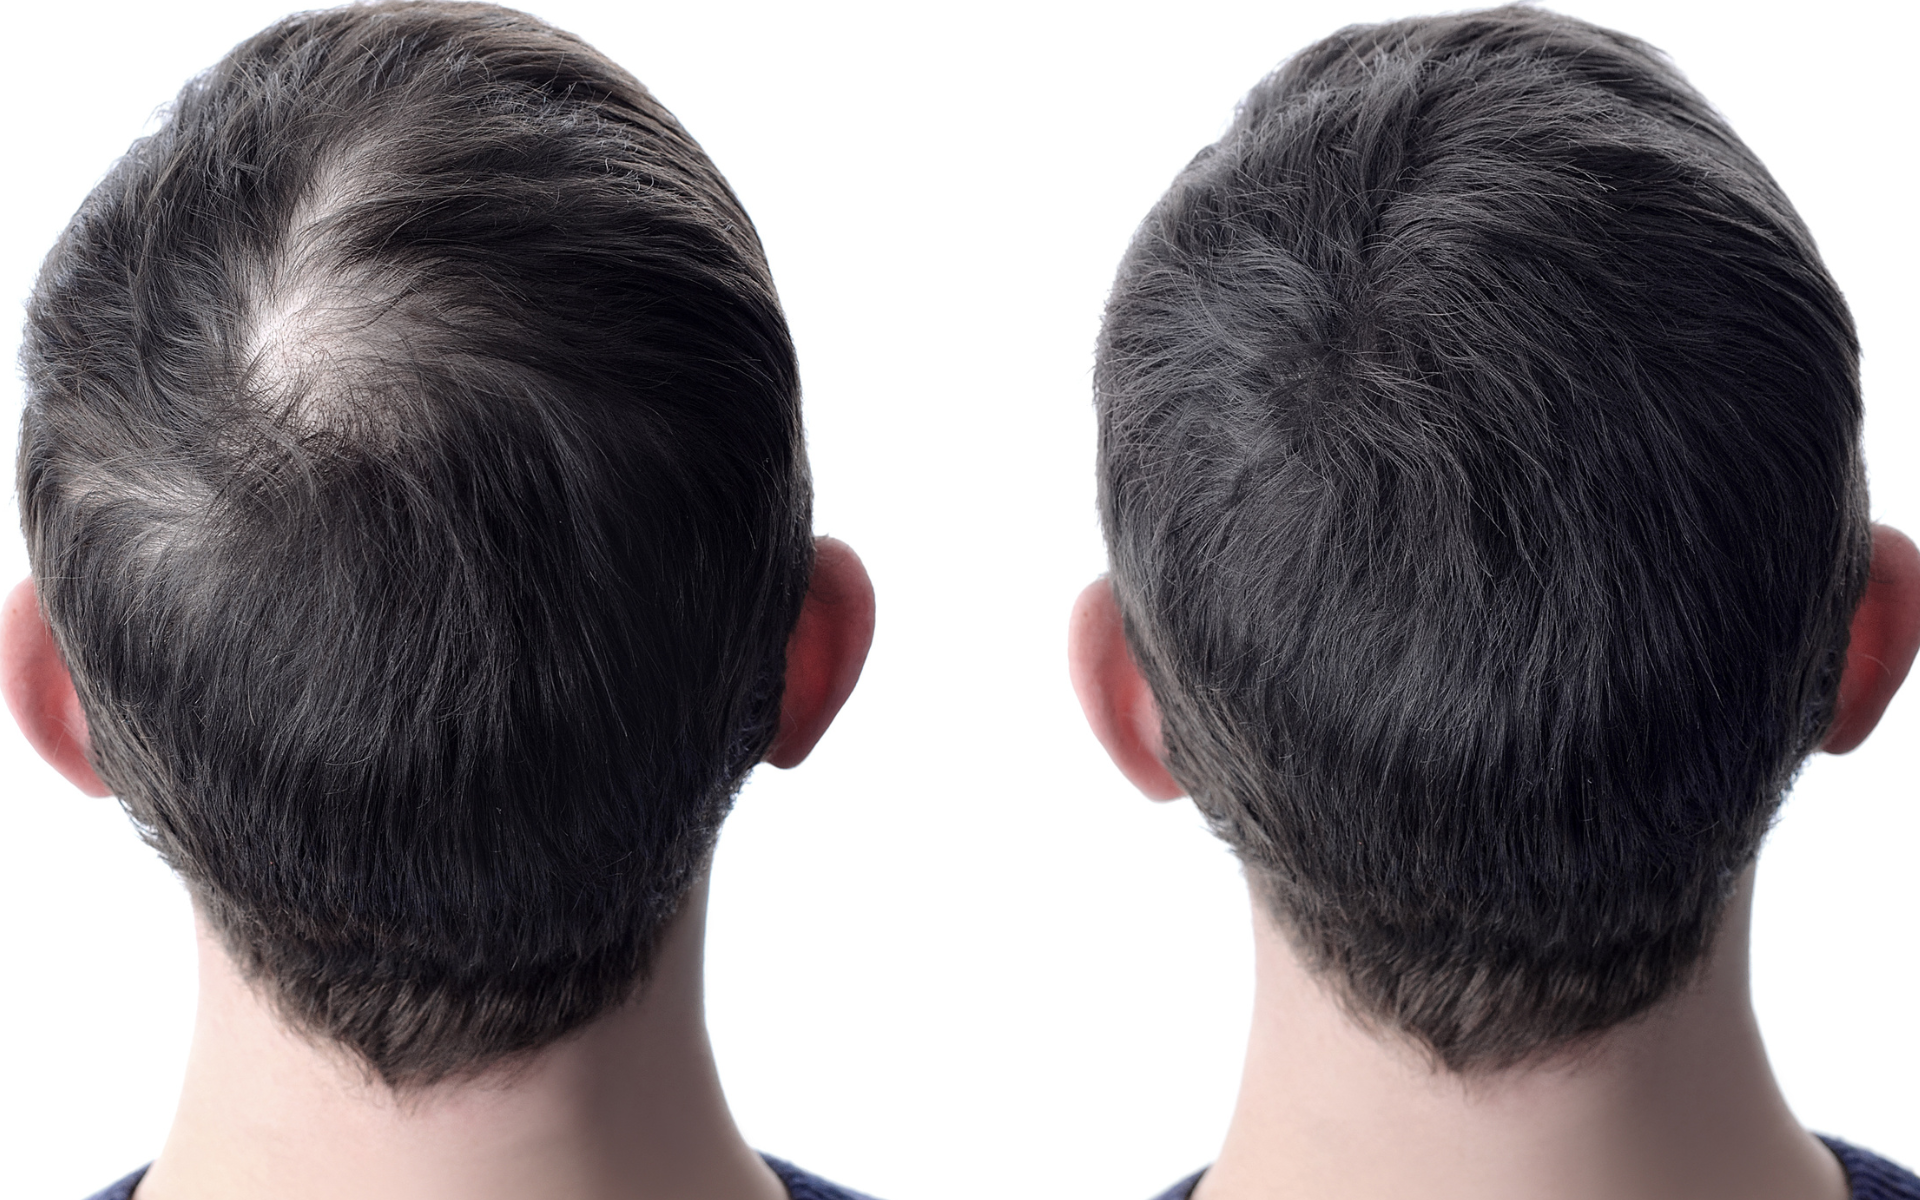 different types of hair transplant